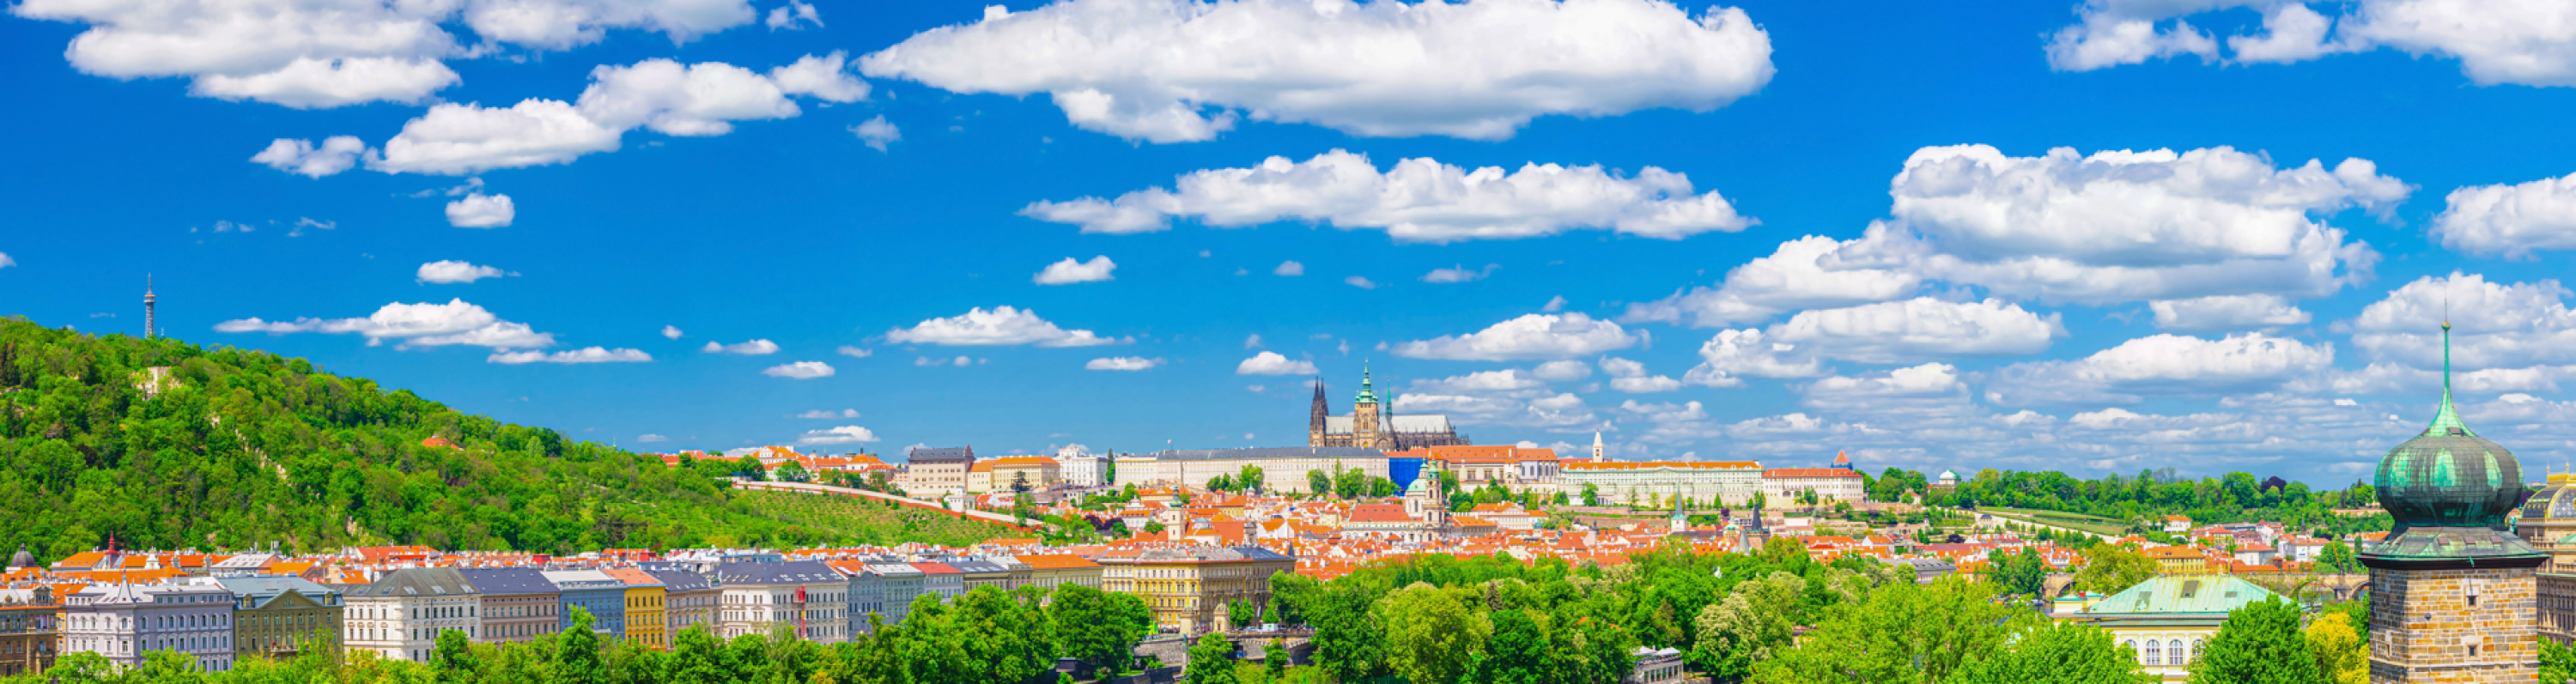 International Conference on New Trends in Technologies, Prague